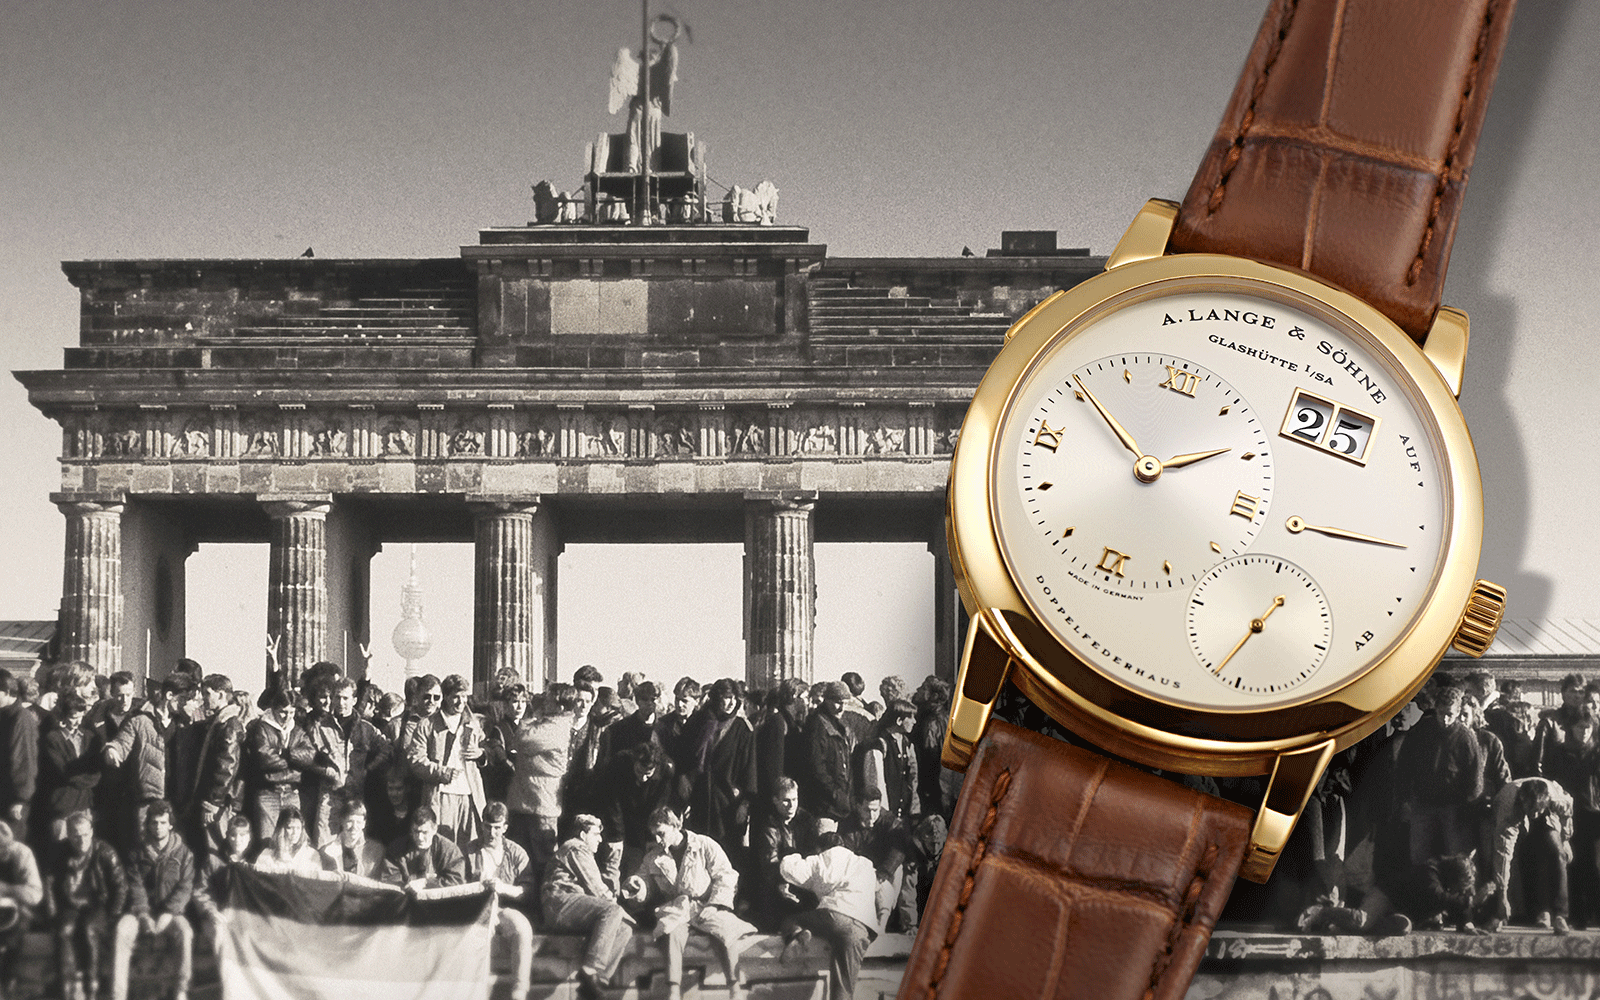 Fall of the Berlin Wall on 9th November 1989. The fall of the Wall not only paved the way to Germany’s reunification but also helped to revive Lange’s watchmaking tradition in Glashütte.